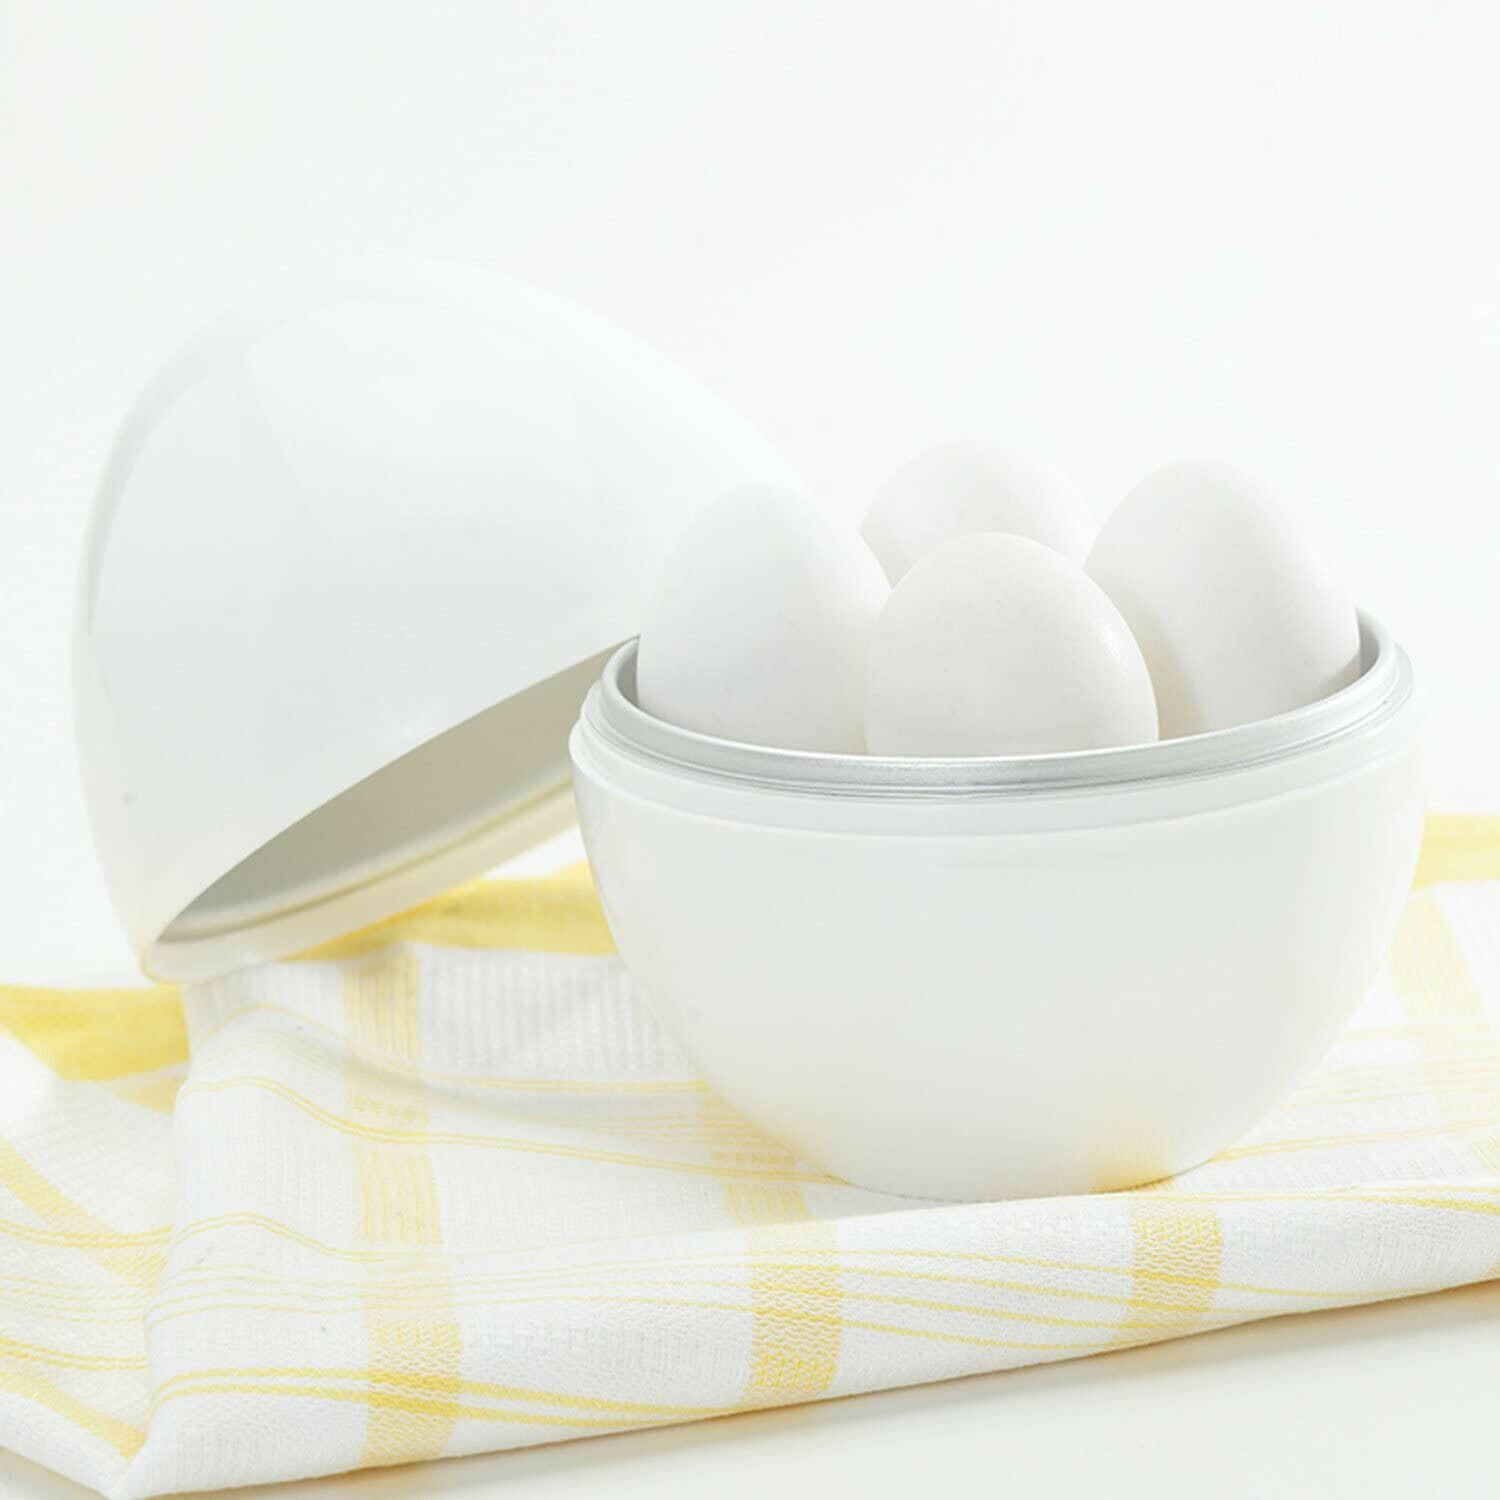 Eggpod by Egg Cooker Wireless Microwave Hardboiled Egg Maker, Cooker, Egg  Boiler & Steamer, 4 Perfectly-Cooked Hard Boiled Eggs in Under 9 Minutes as  Seen - China Egg Boilers and Mini Egg